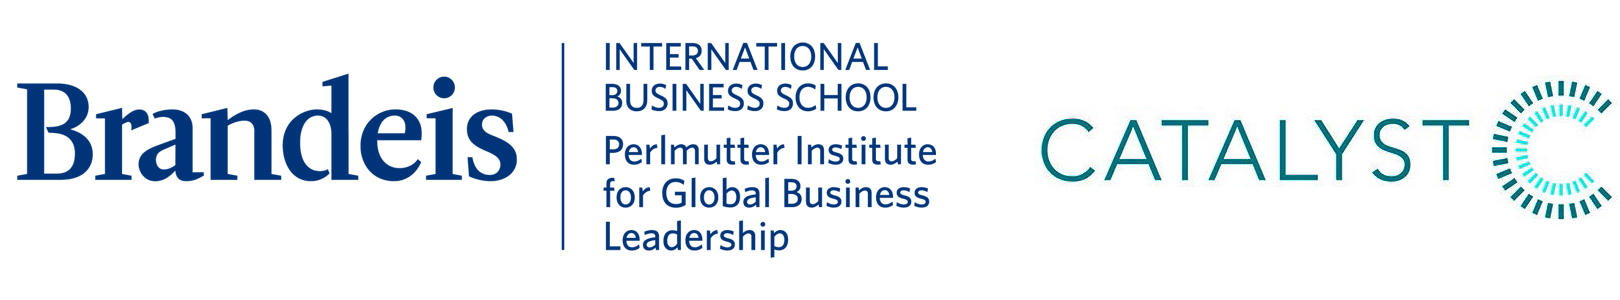 Brandeis University International Business School: The Perlmutter Institute for Global Business Leadership and Catalyst